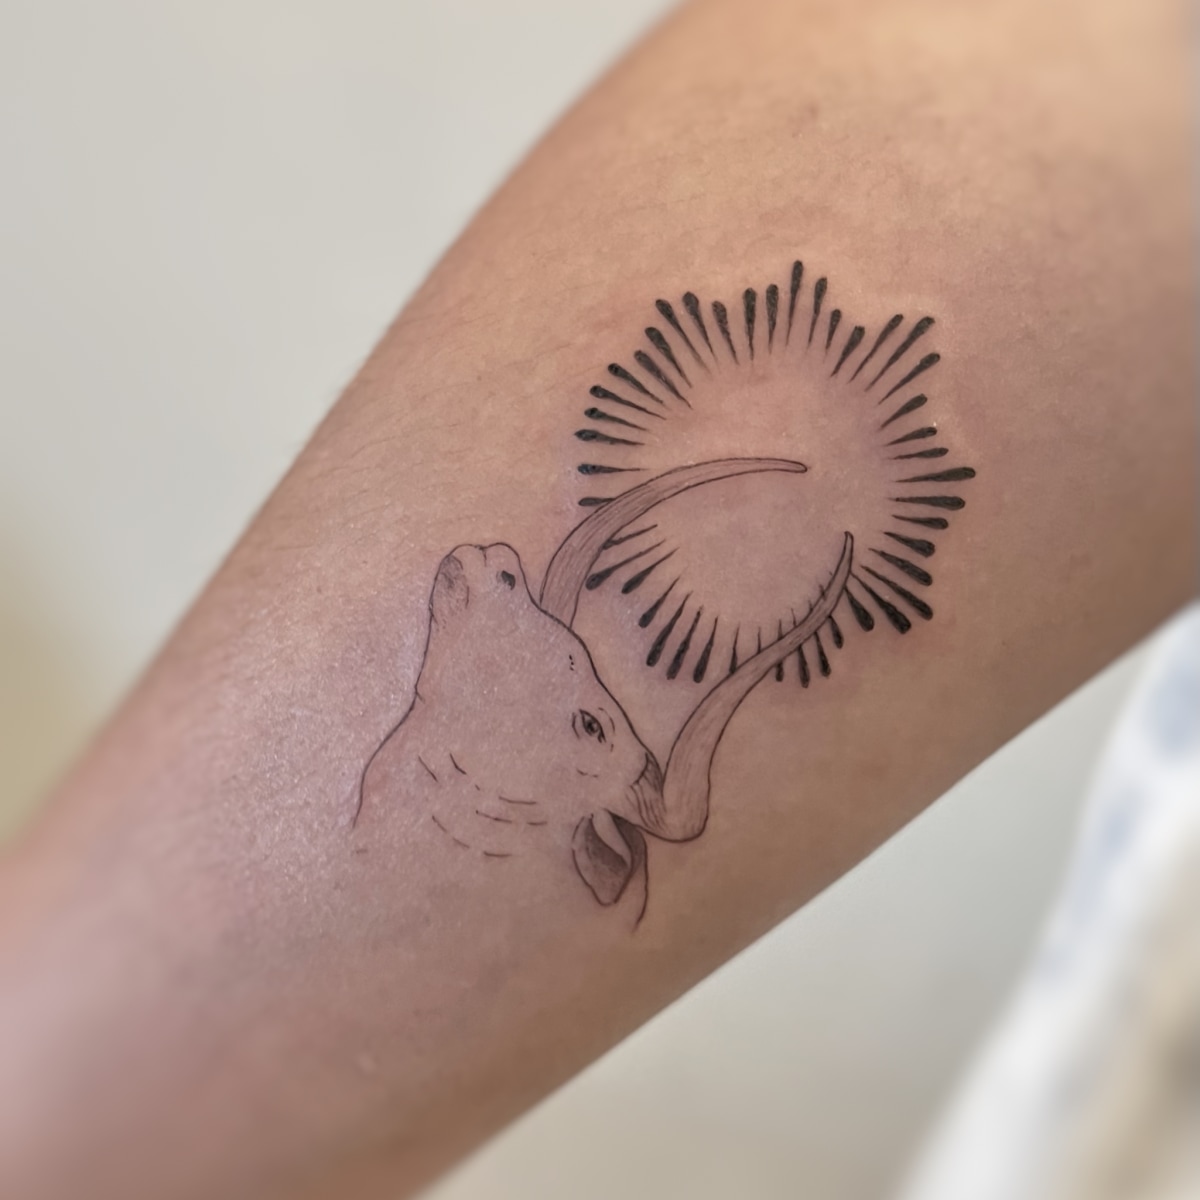 16 Adorable Tattoos That Will Make You Smile  easyink